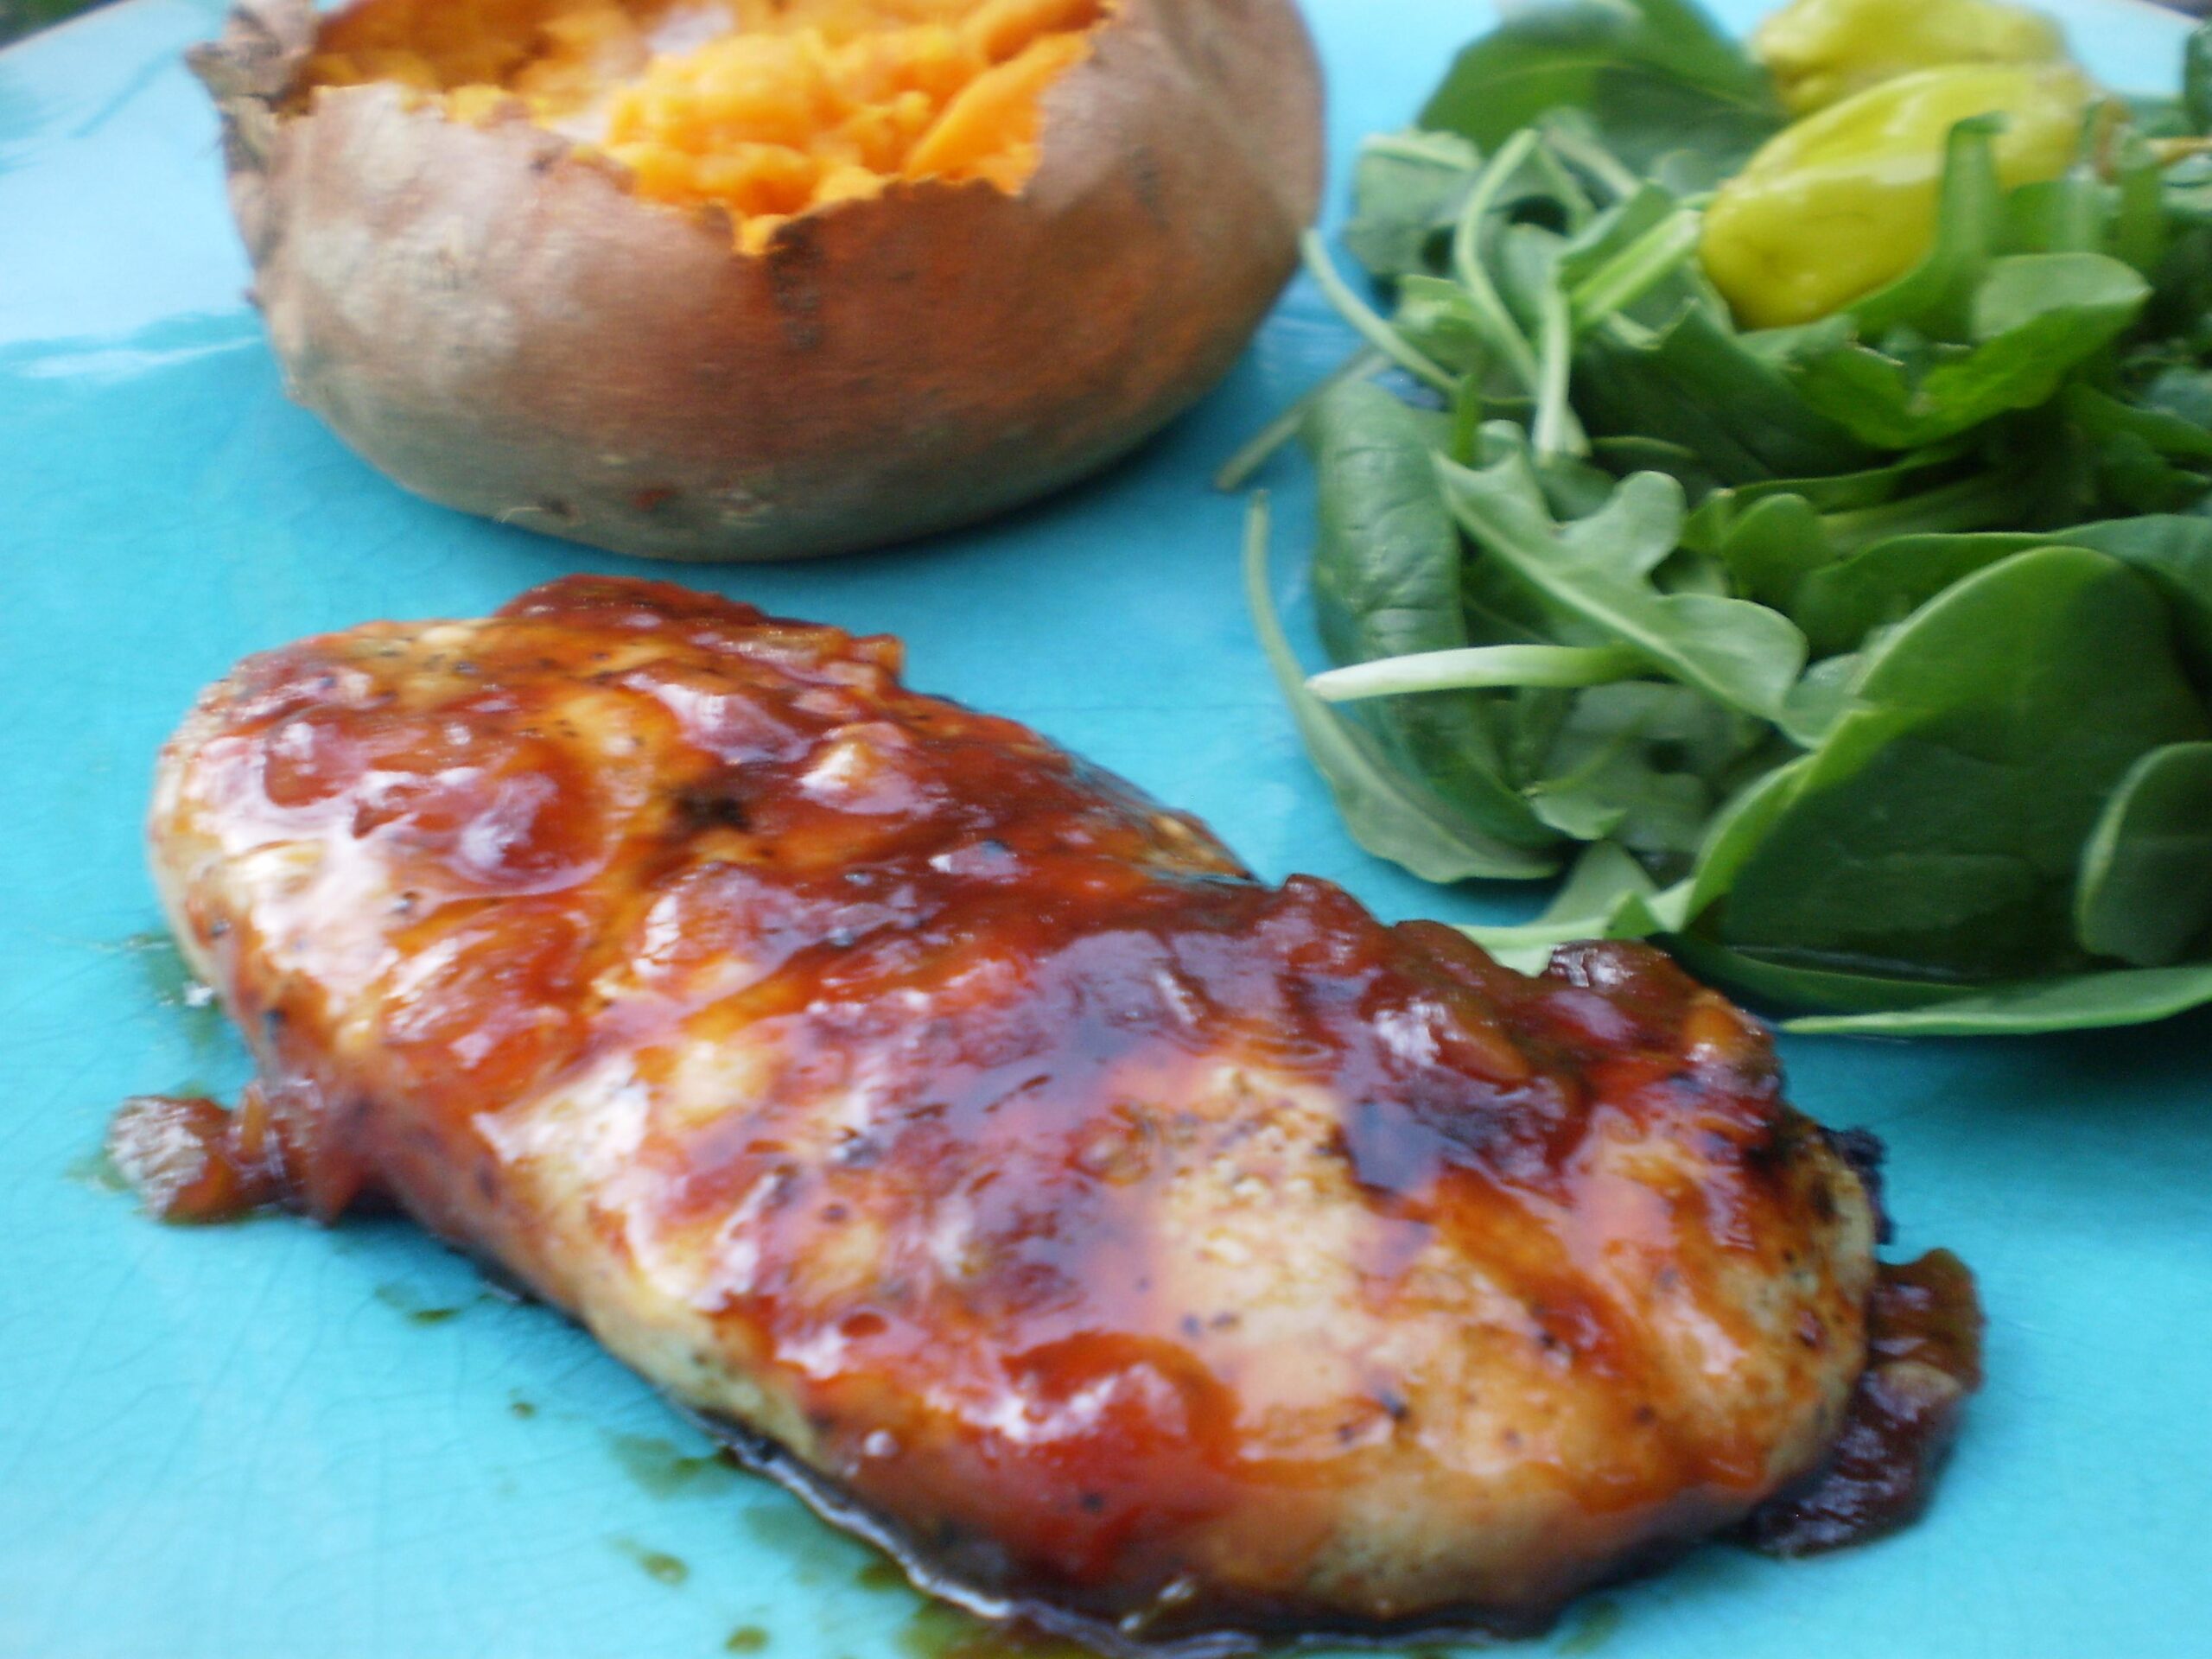  Get ready to spice up your BBQ with this mouth-watering onion sauce!